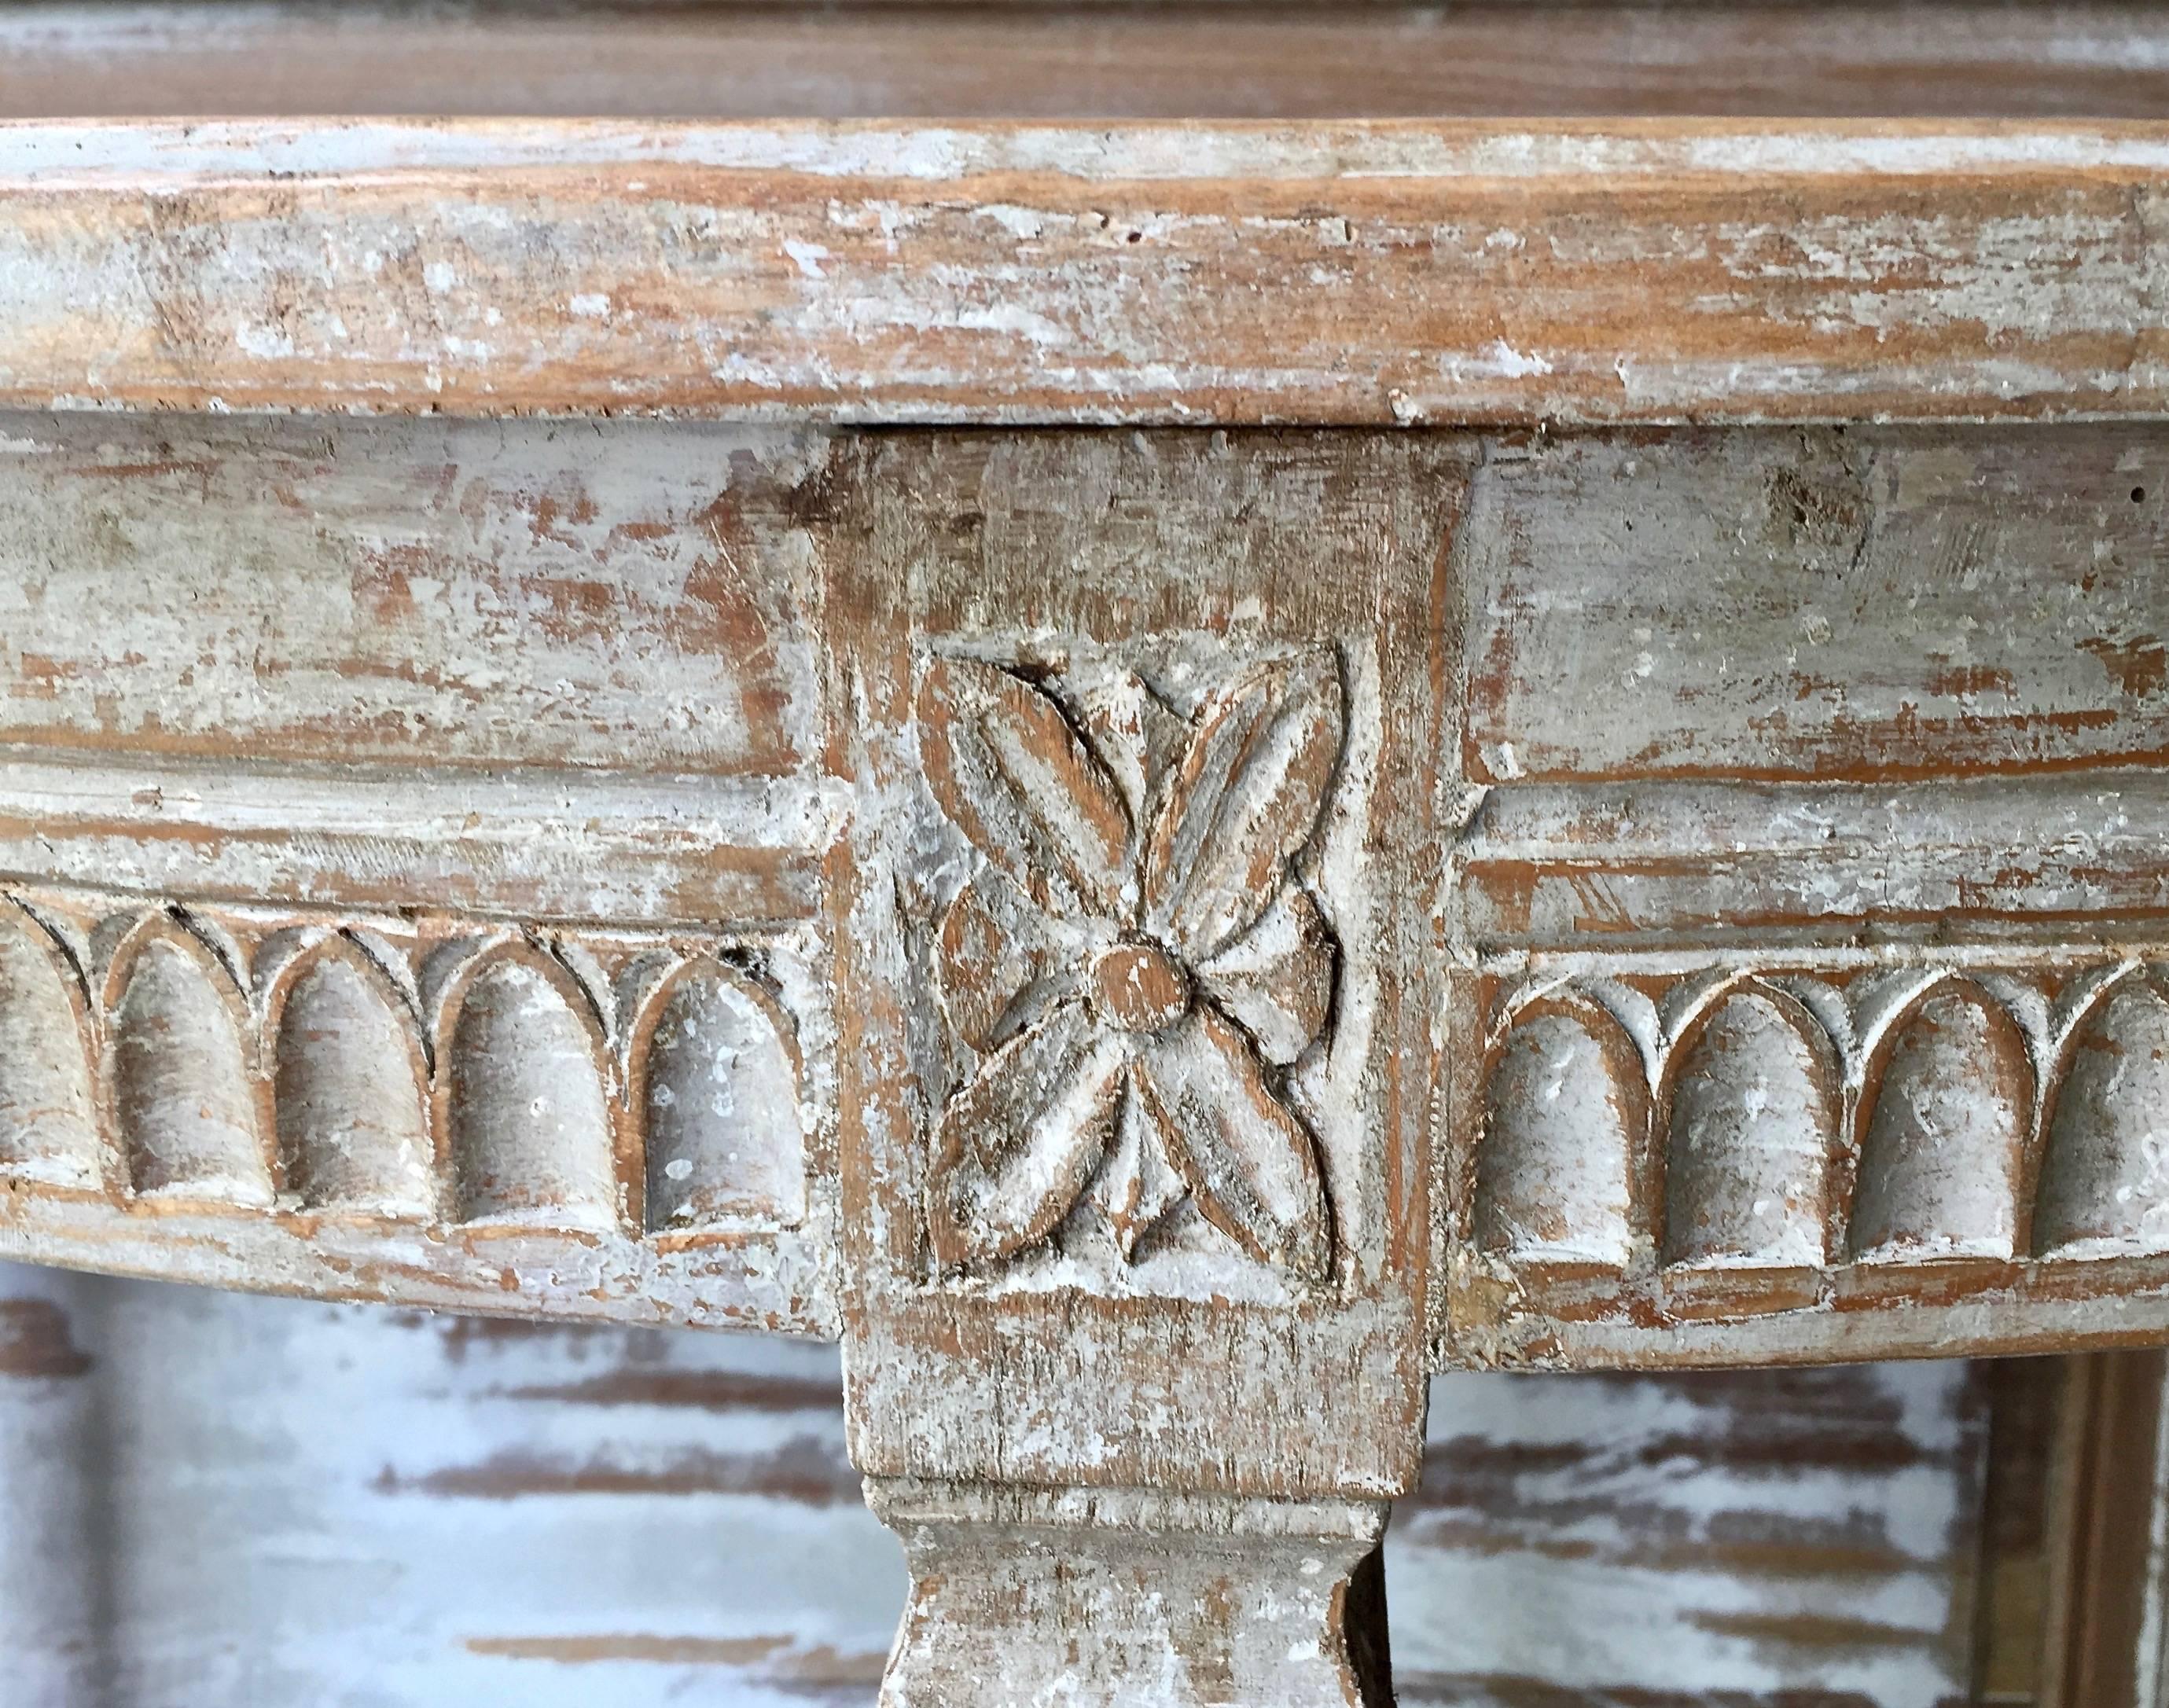 Hand-Carved Pair of Period Gustavian Console Tables